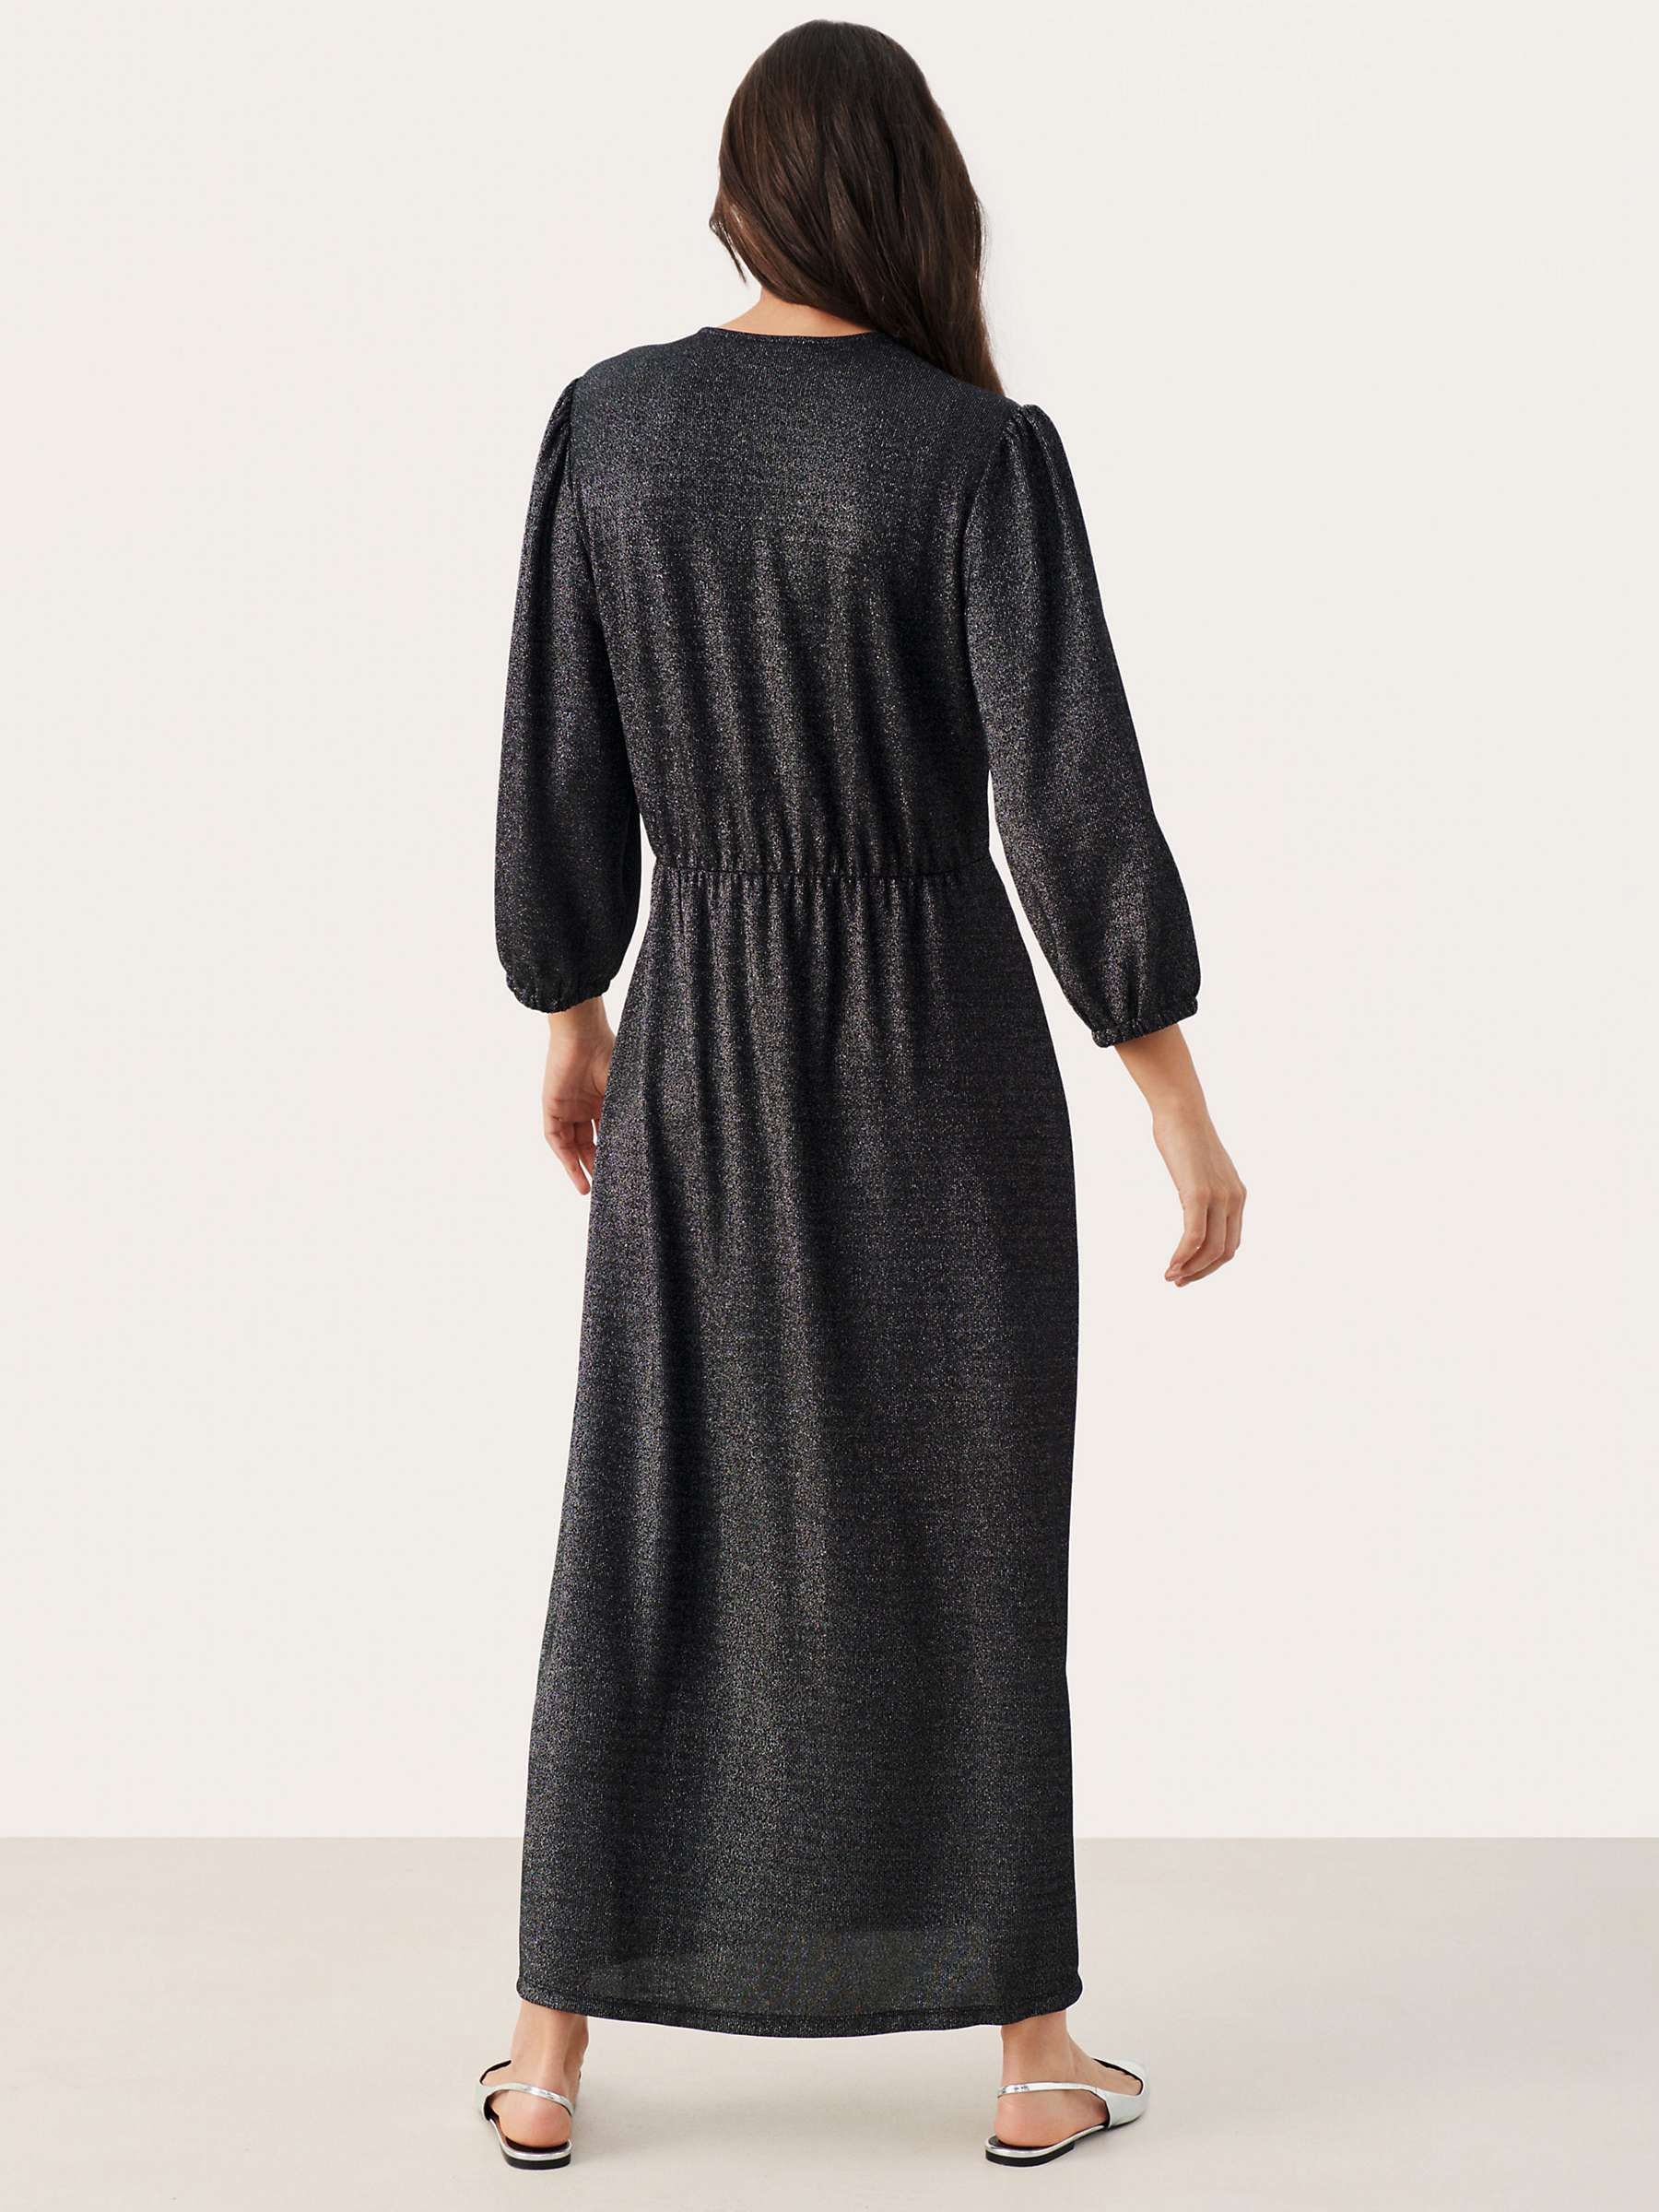 Buy Part Two Dalmine 3/4 Sleeve Glitter Wrap Maxi Dress Online at johnlewis.com